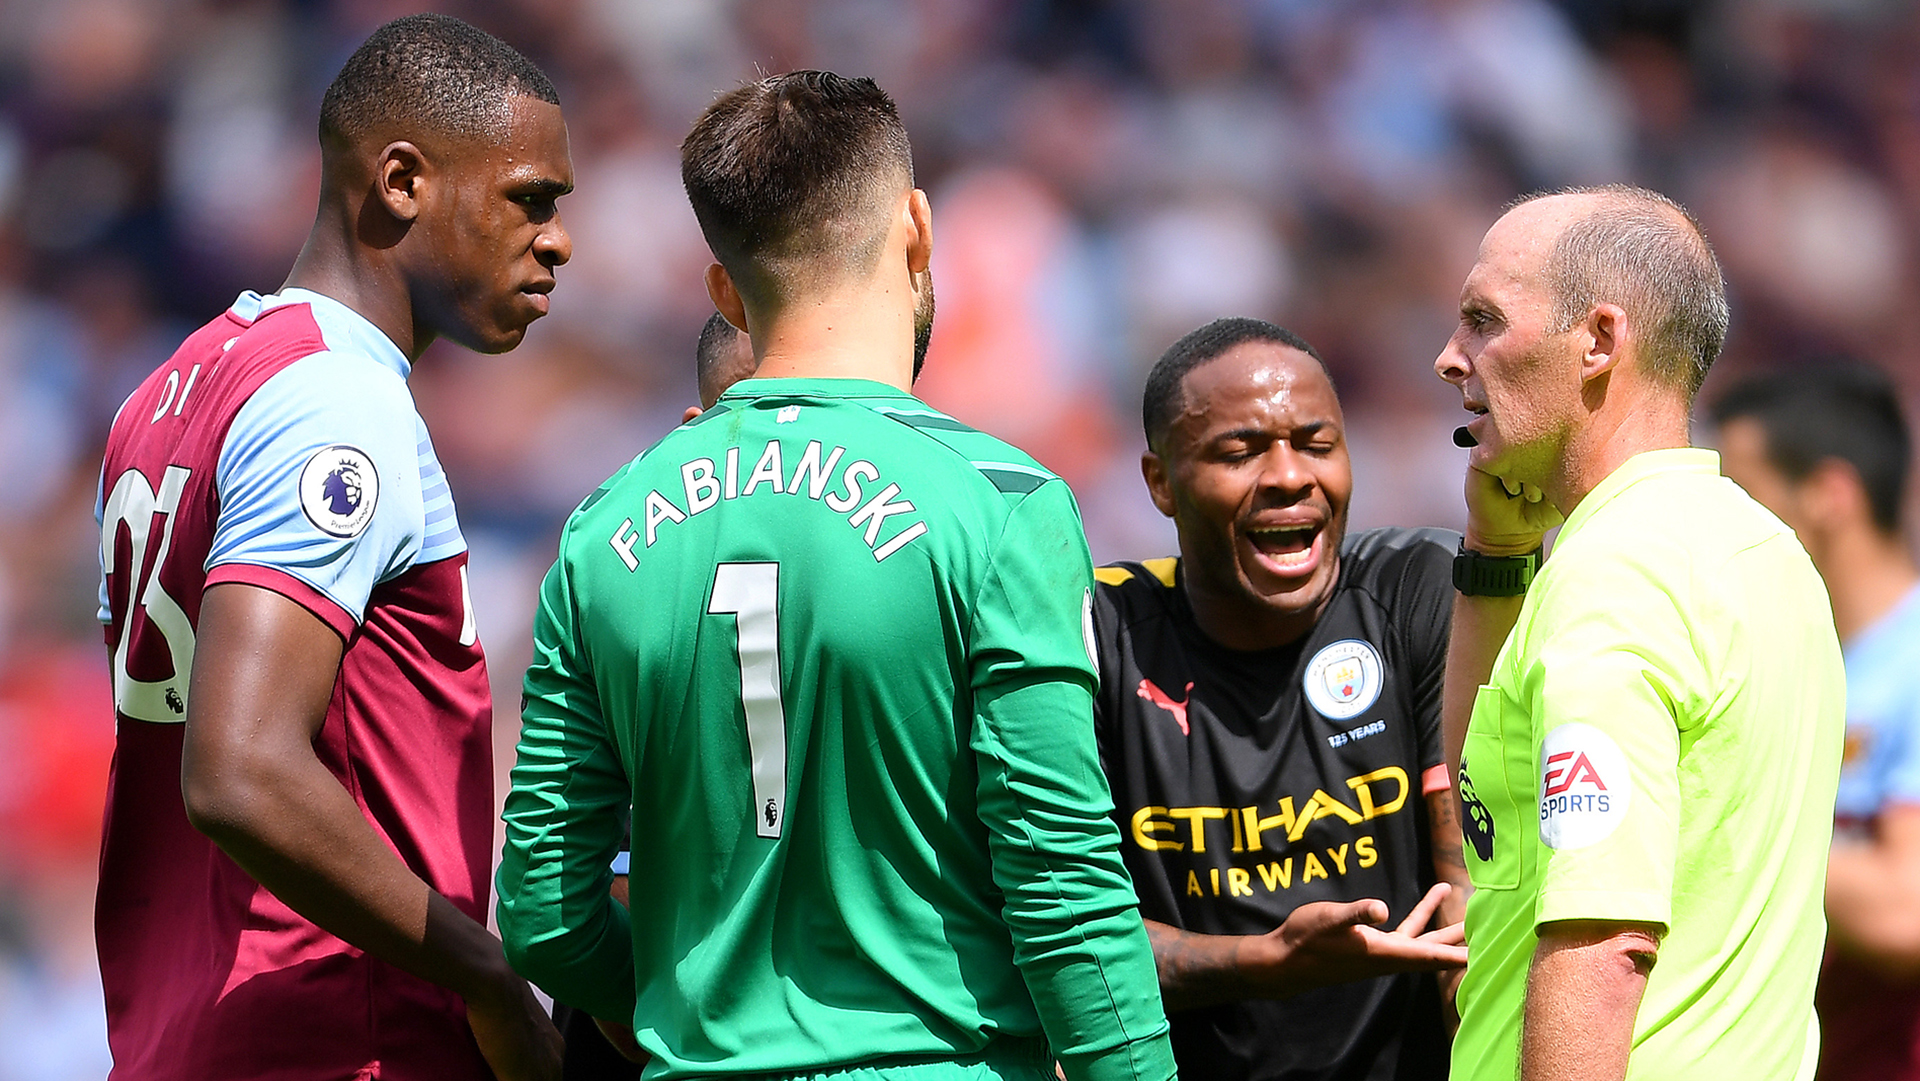 Man City vs West Ham dominated by VAR as Jesus goal ruled out & Aguero is allowed to retake missed penalty